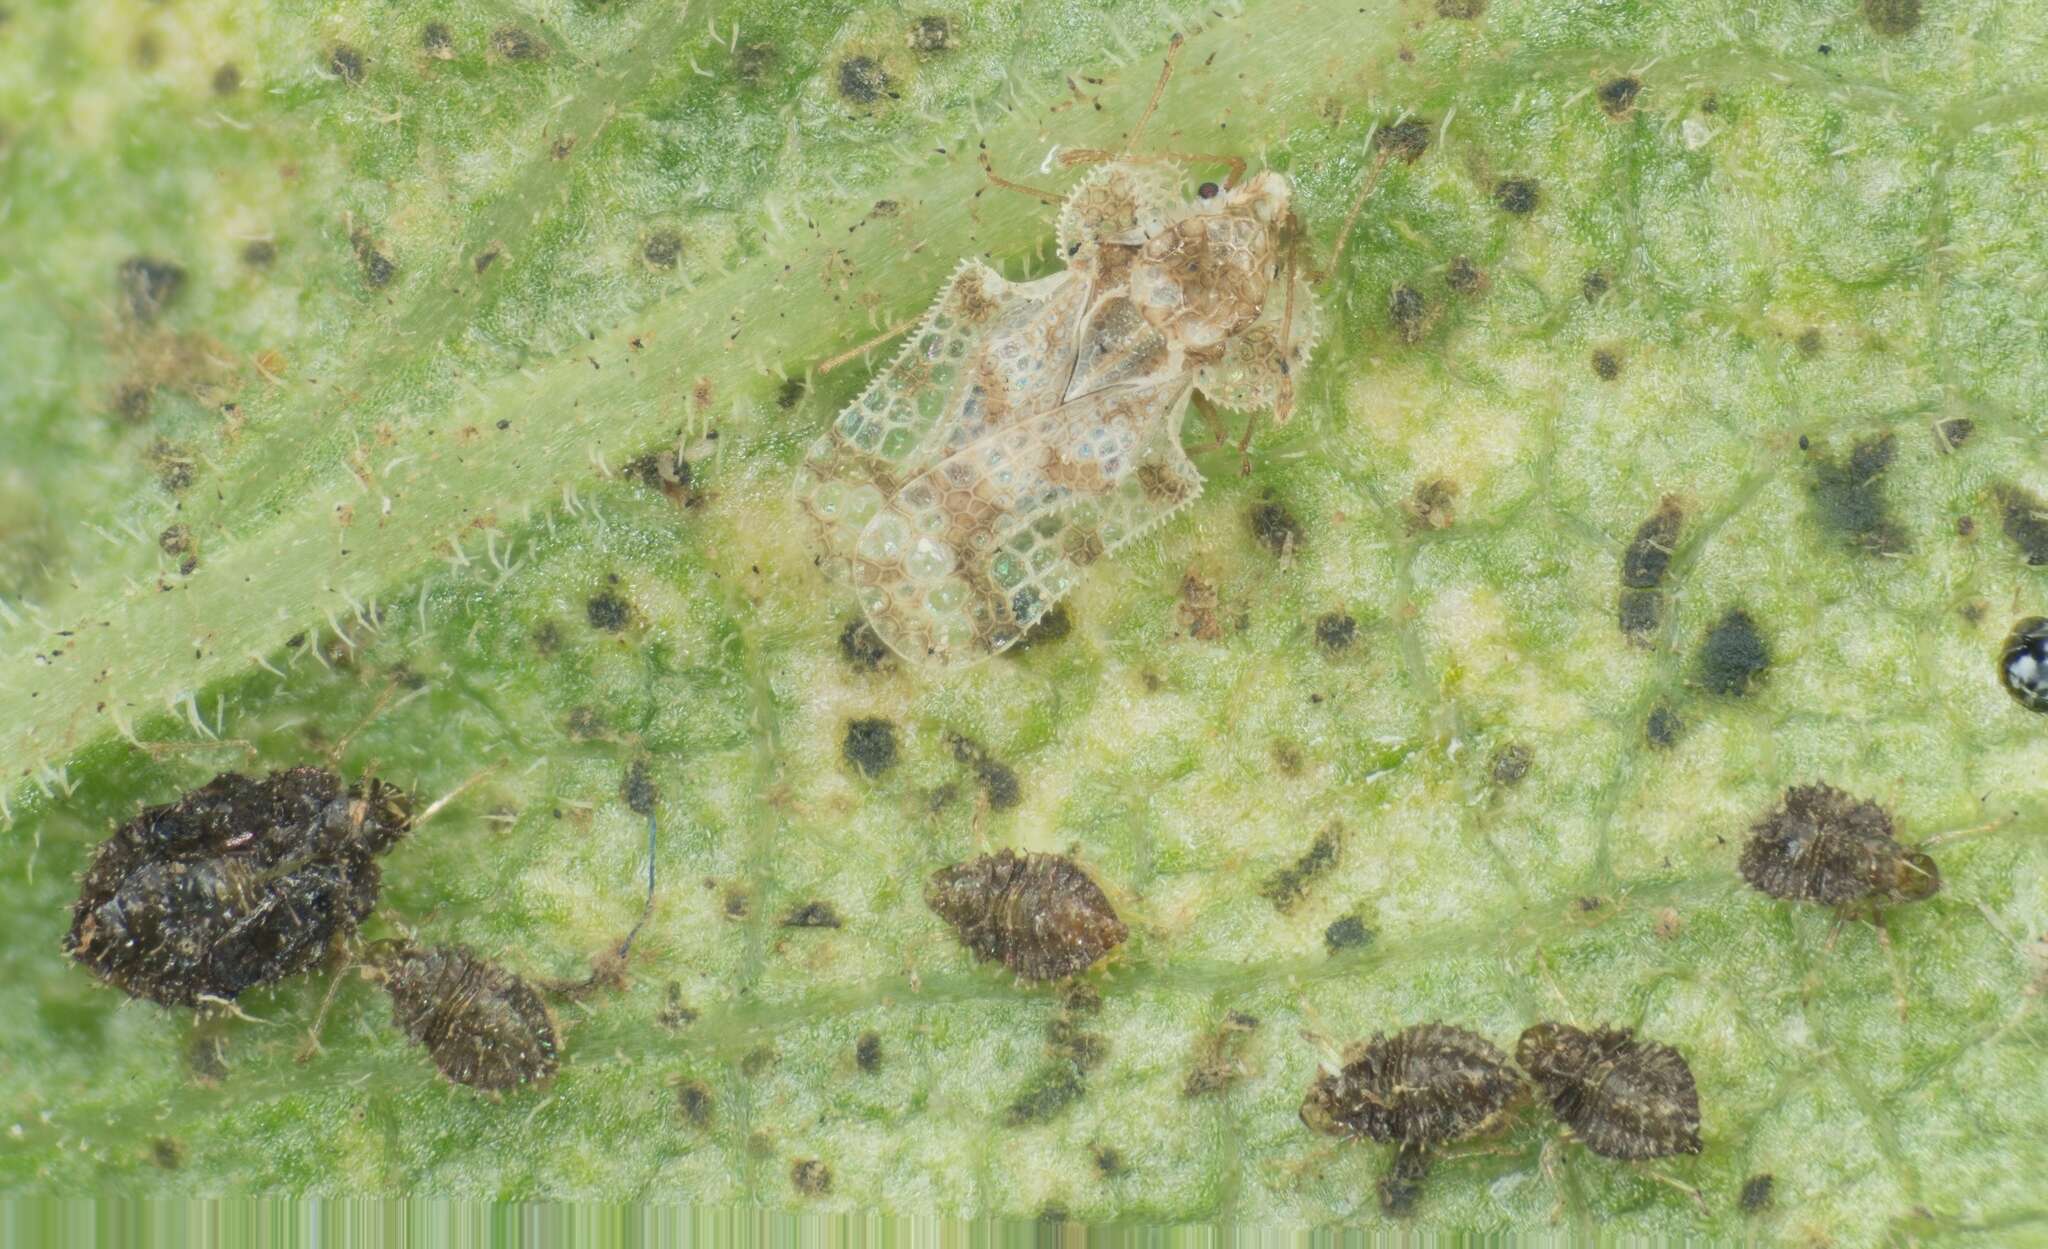 Image of Morrill lace bug